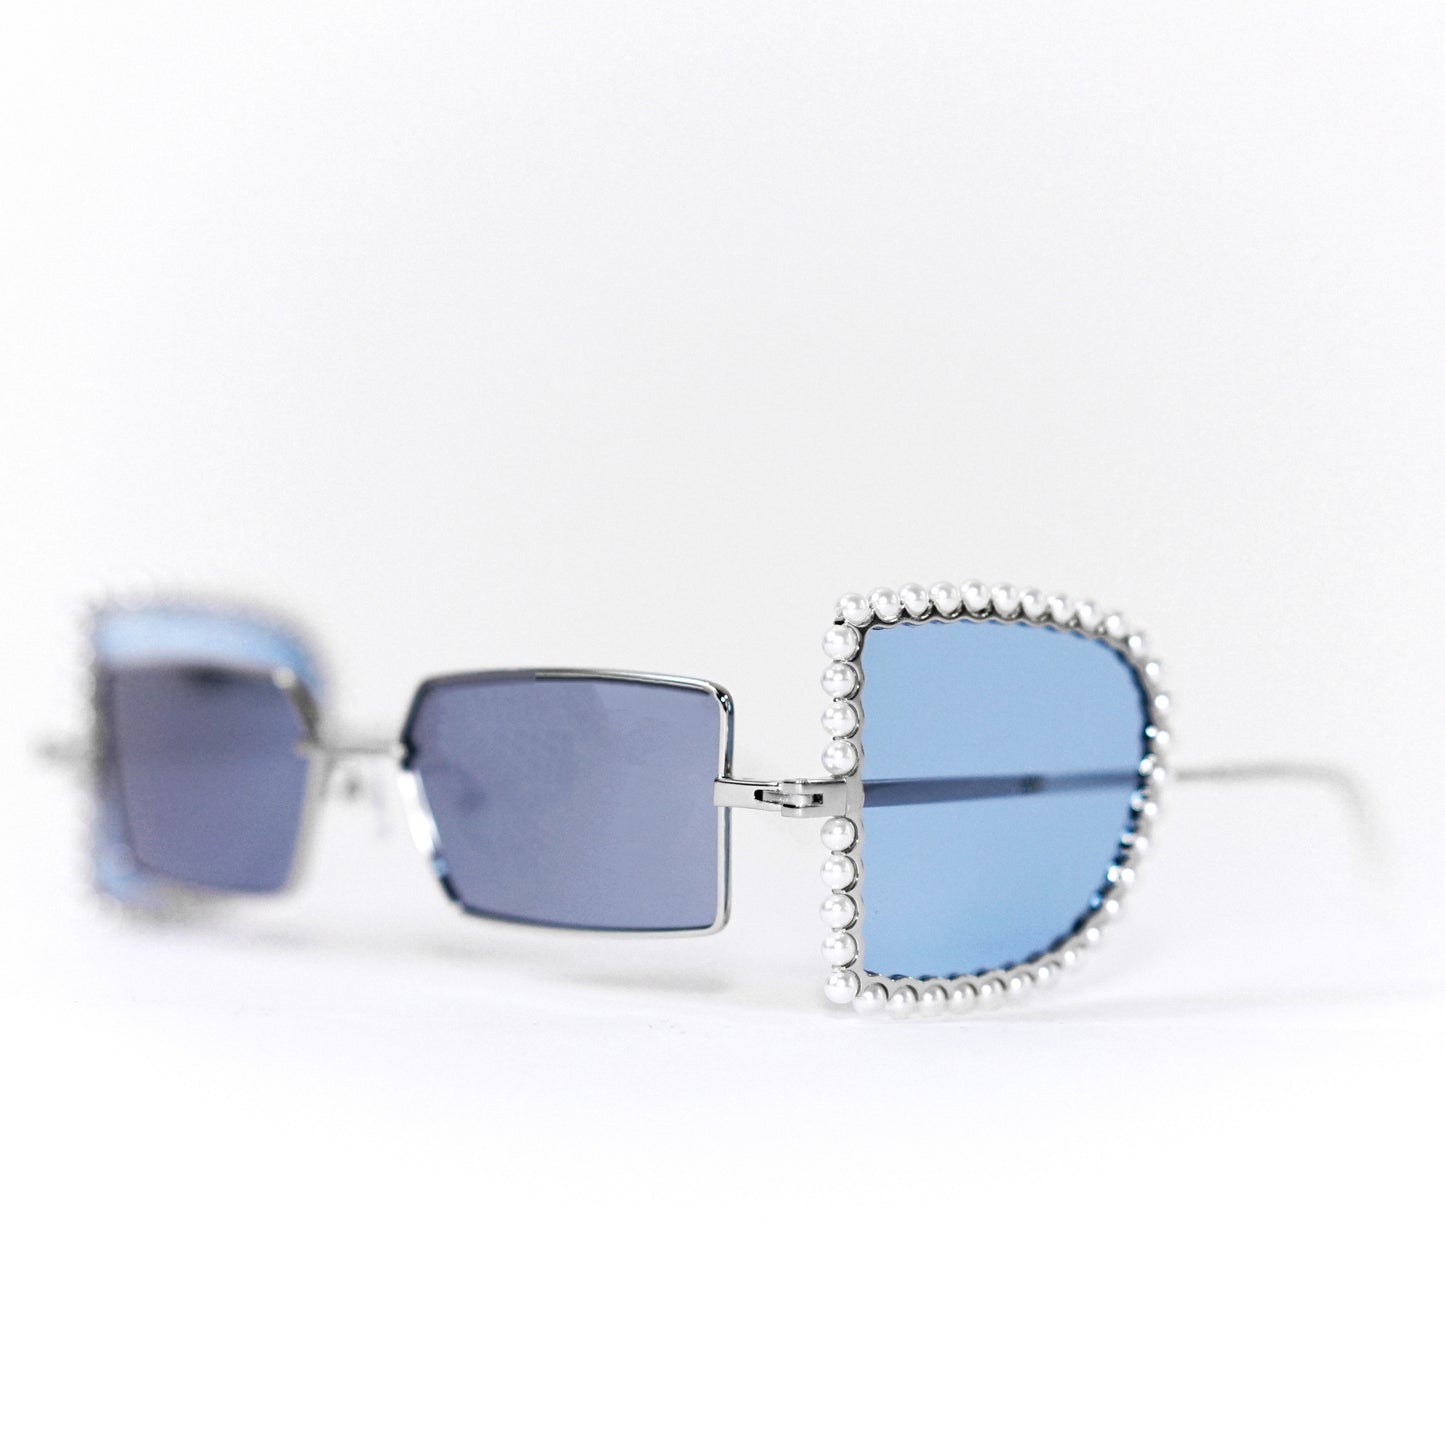 sunglasses with pearl rimmed window opened and blue polaroid lens 45 angled